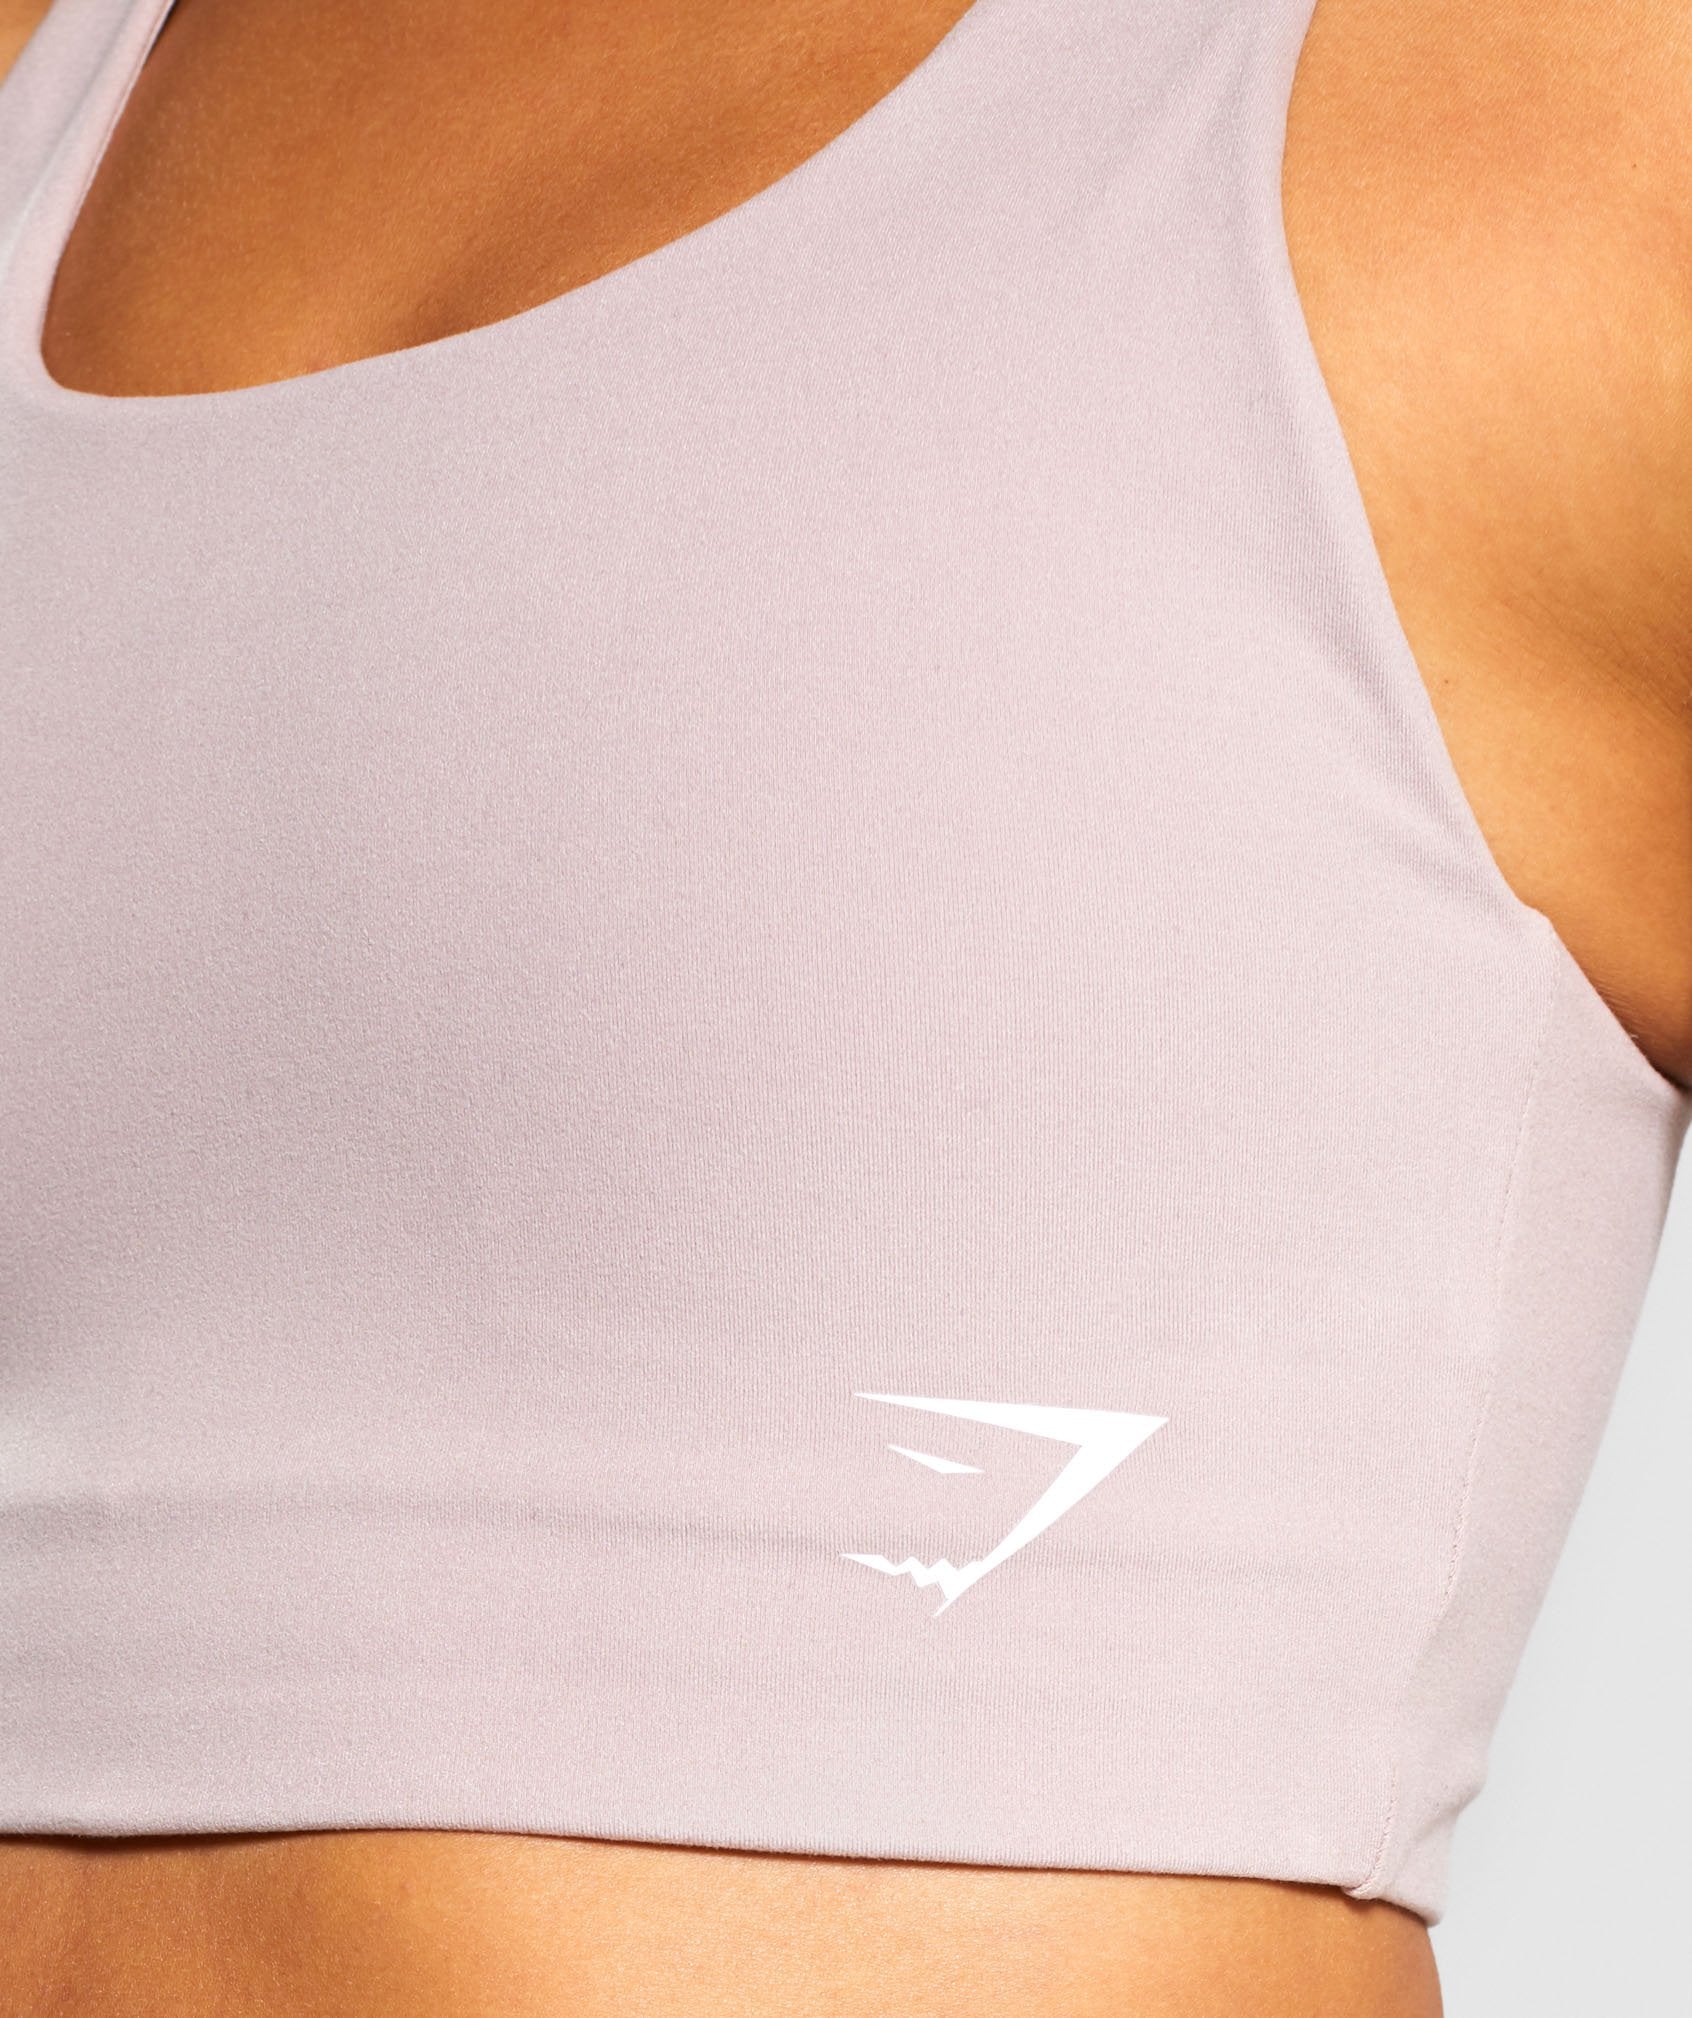 Dreamy Sports Bra in Taupe/White - view 5